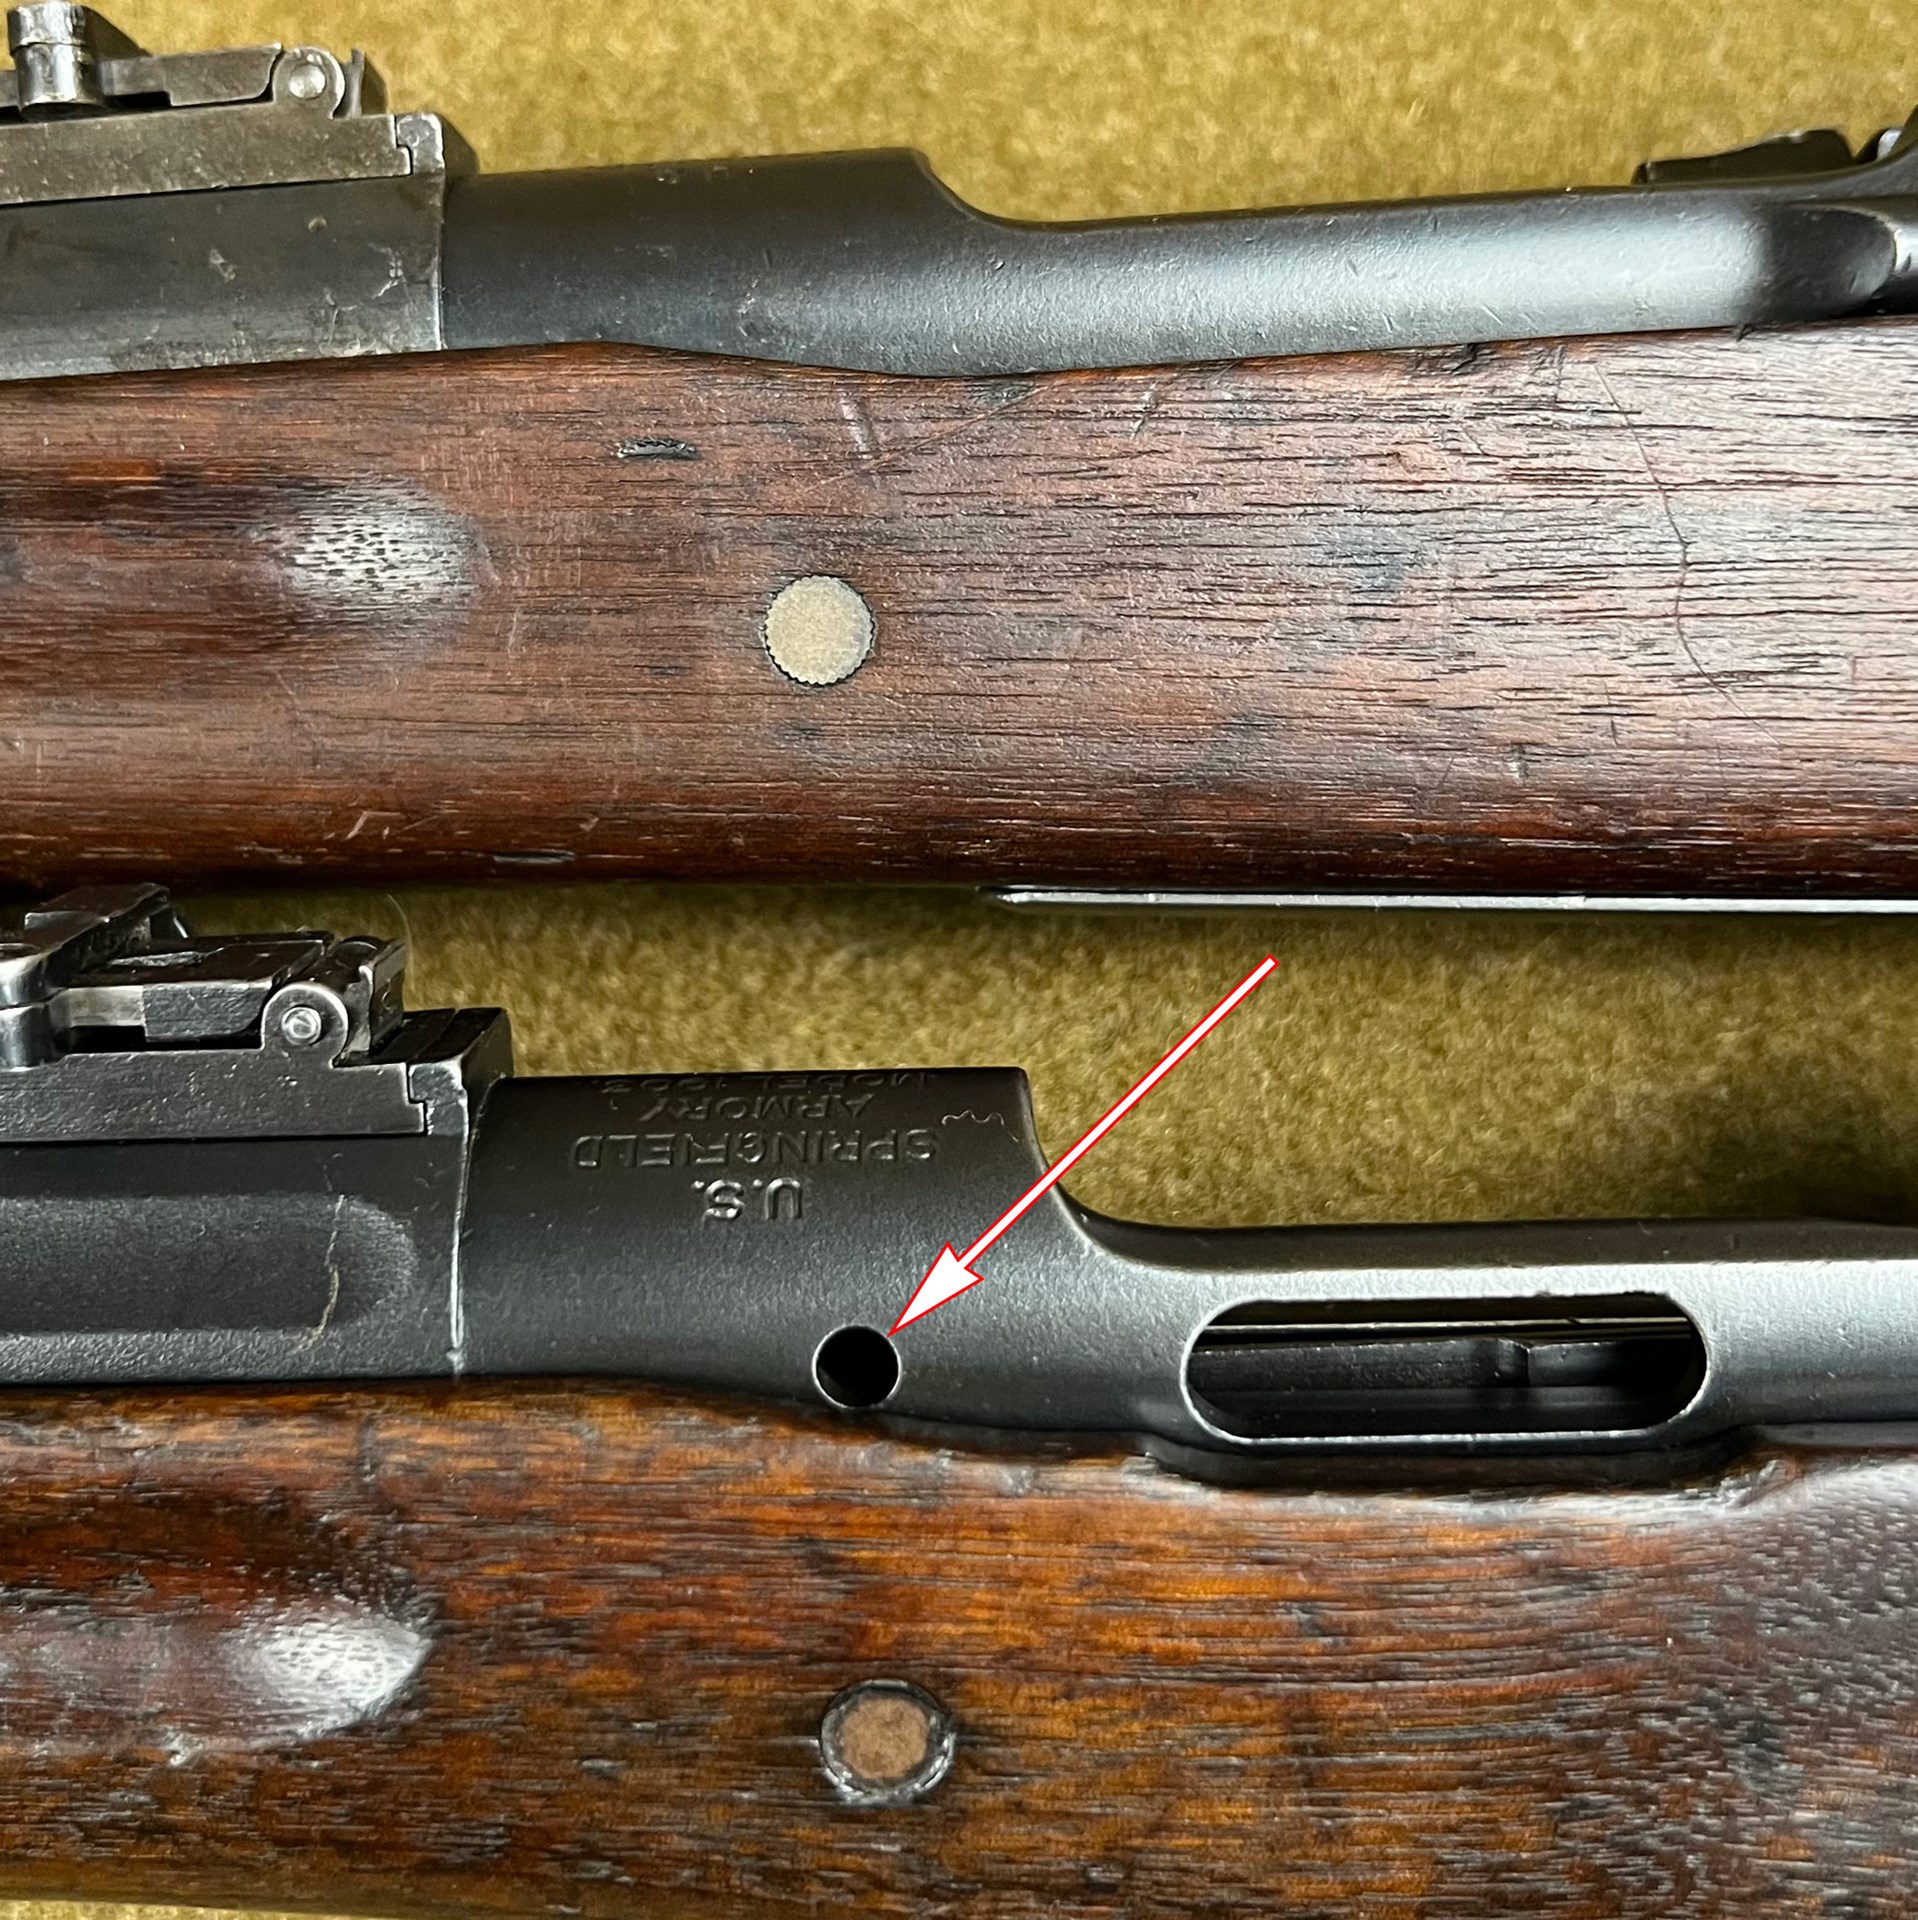 M1903 comparison and illustration with arrow on "Hatcher Hole"